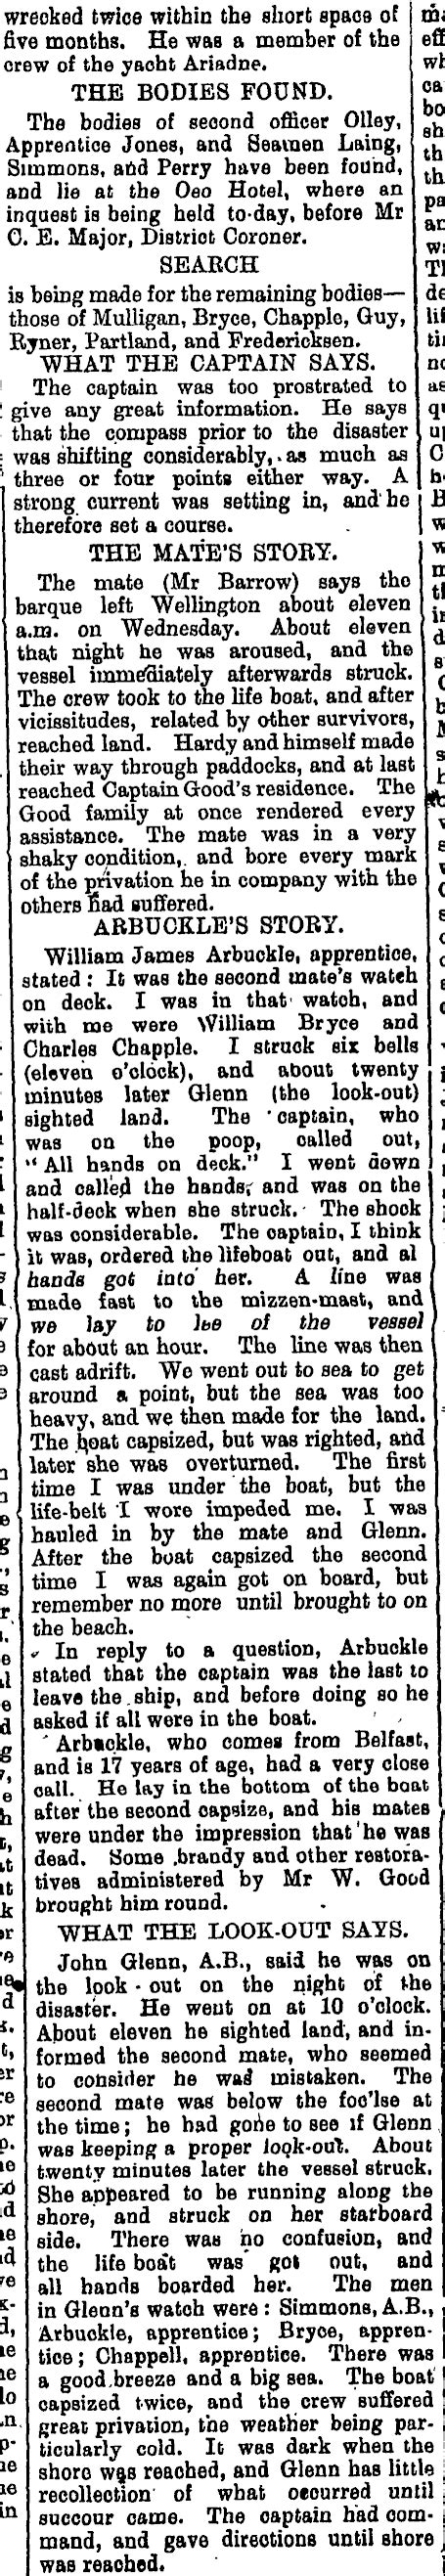 Papers Past Newspapers Hawera And Normanby Star 26 July 1901 The